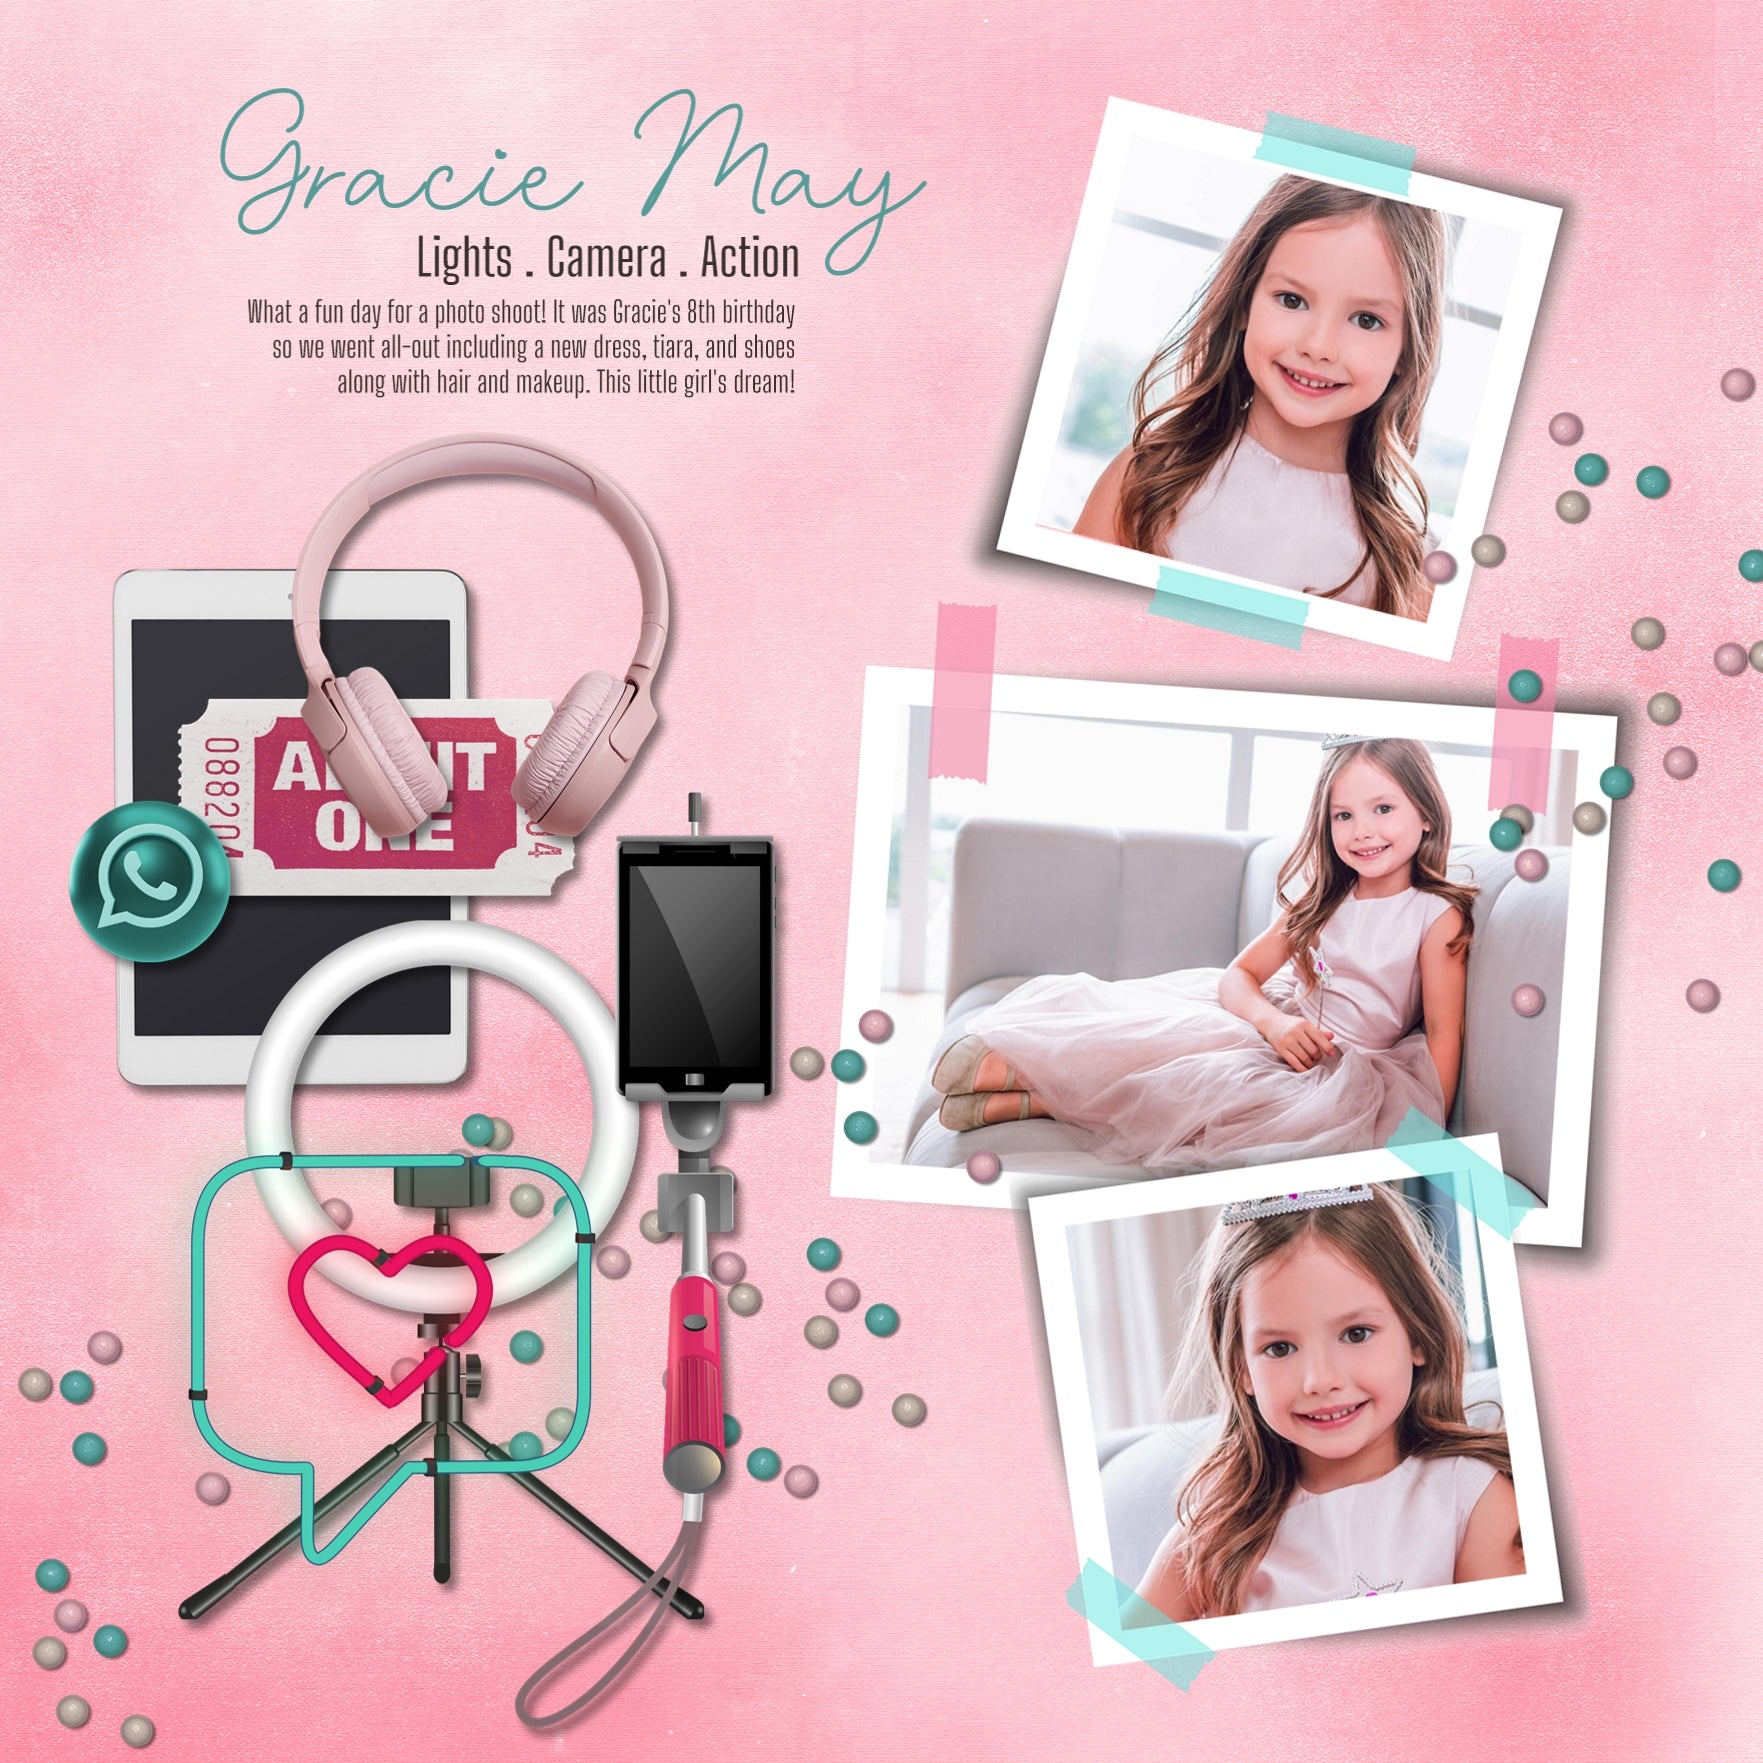 The Tweens & Teens Elements 2 is filled with everything you'll need to document your children or grandchildren as they go through the different stages in life. Whether you have a young boy or girl, this slightly feminine collection is designed to mix and match with ease.